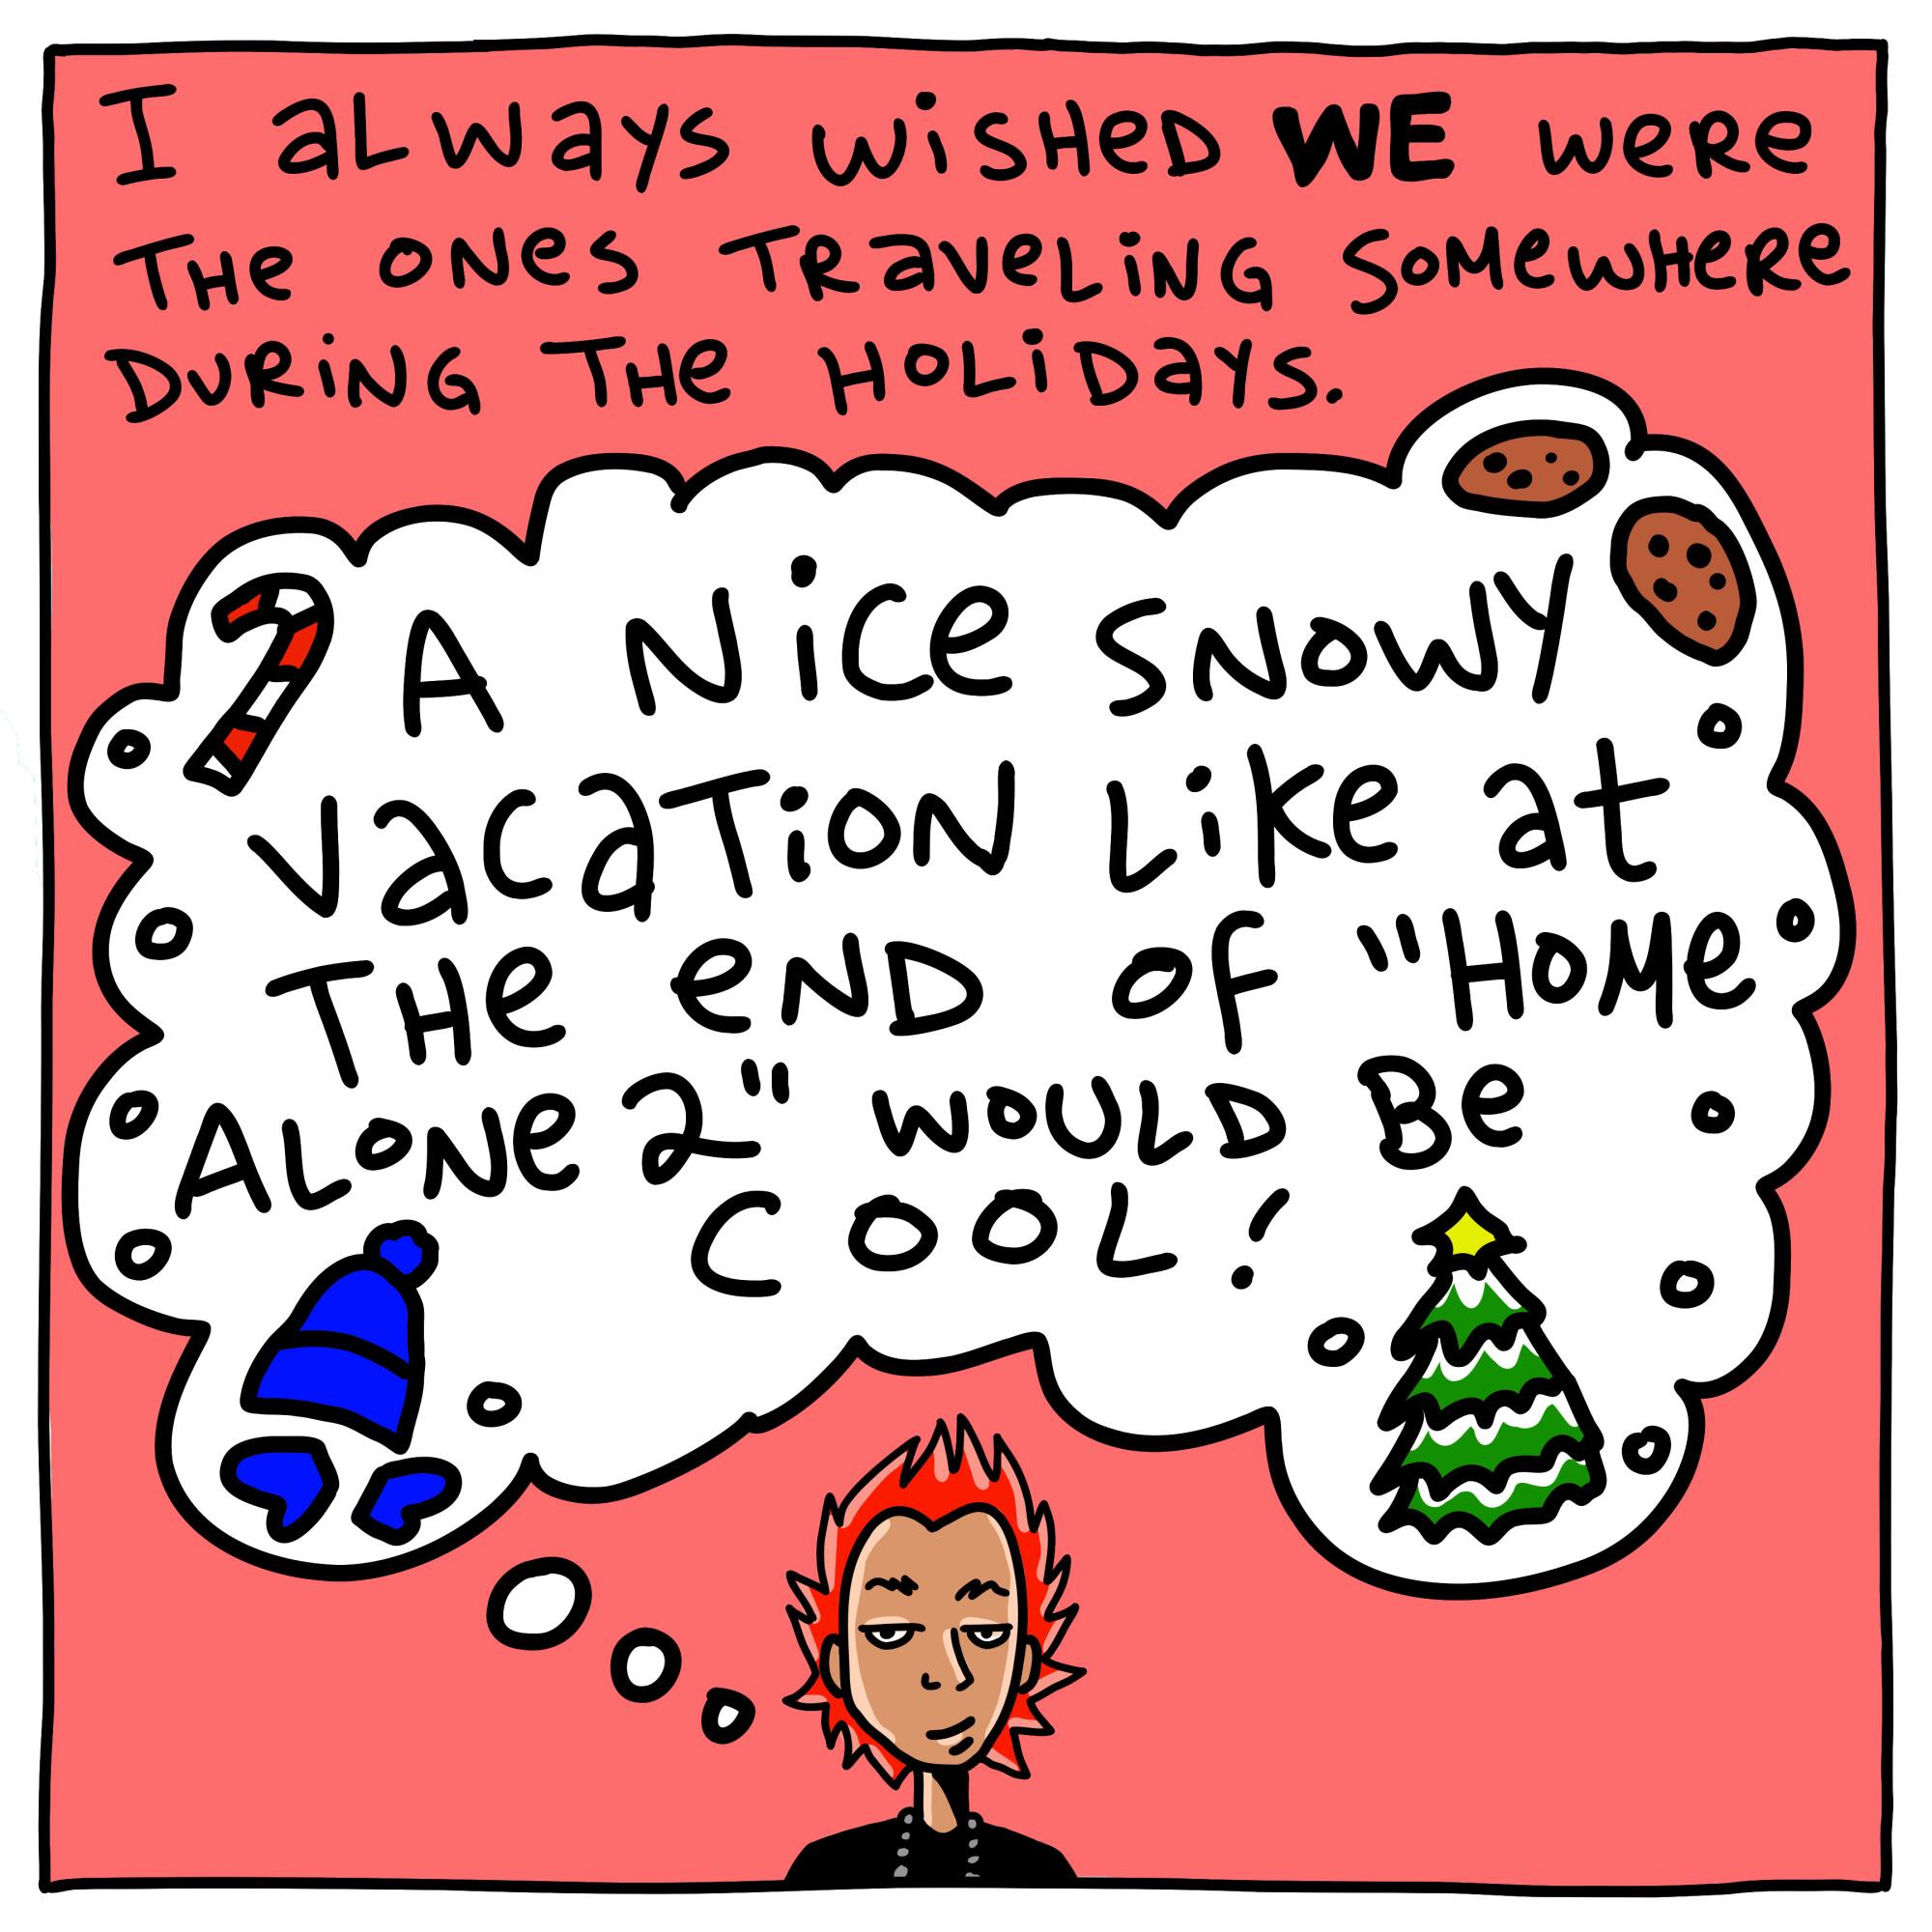 I always wished we were the ones traveling somewhere during the holidays